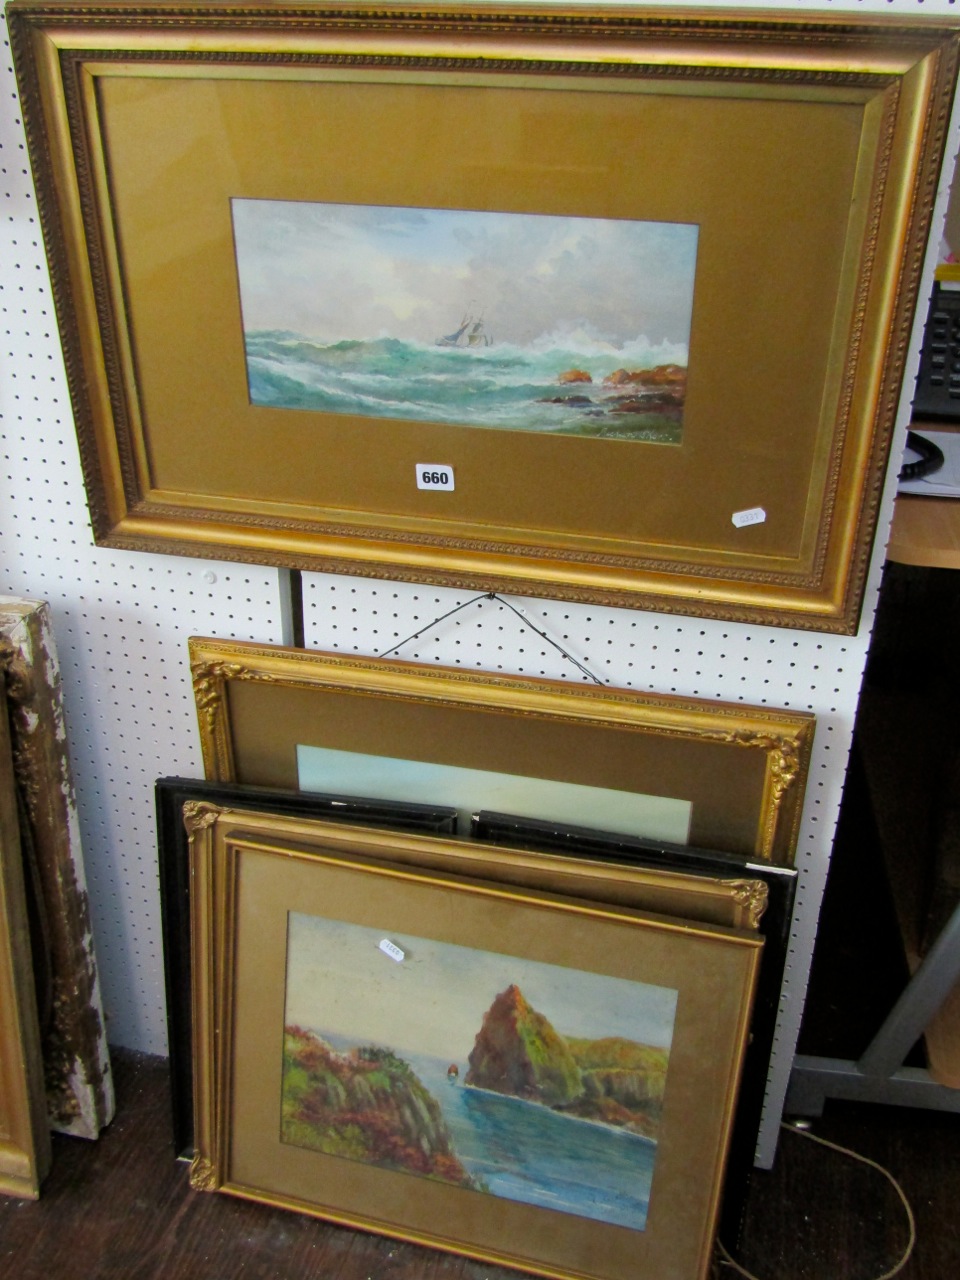 A collection of late 19th/early 20th century gouaches of marine subjects including study of a